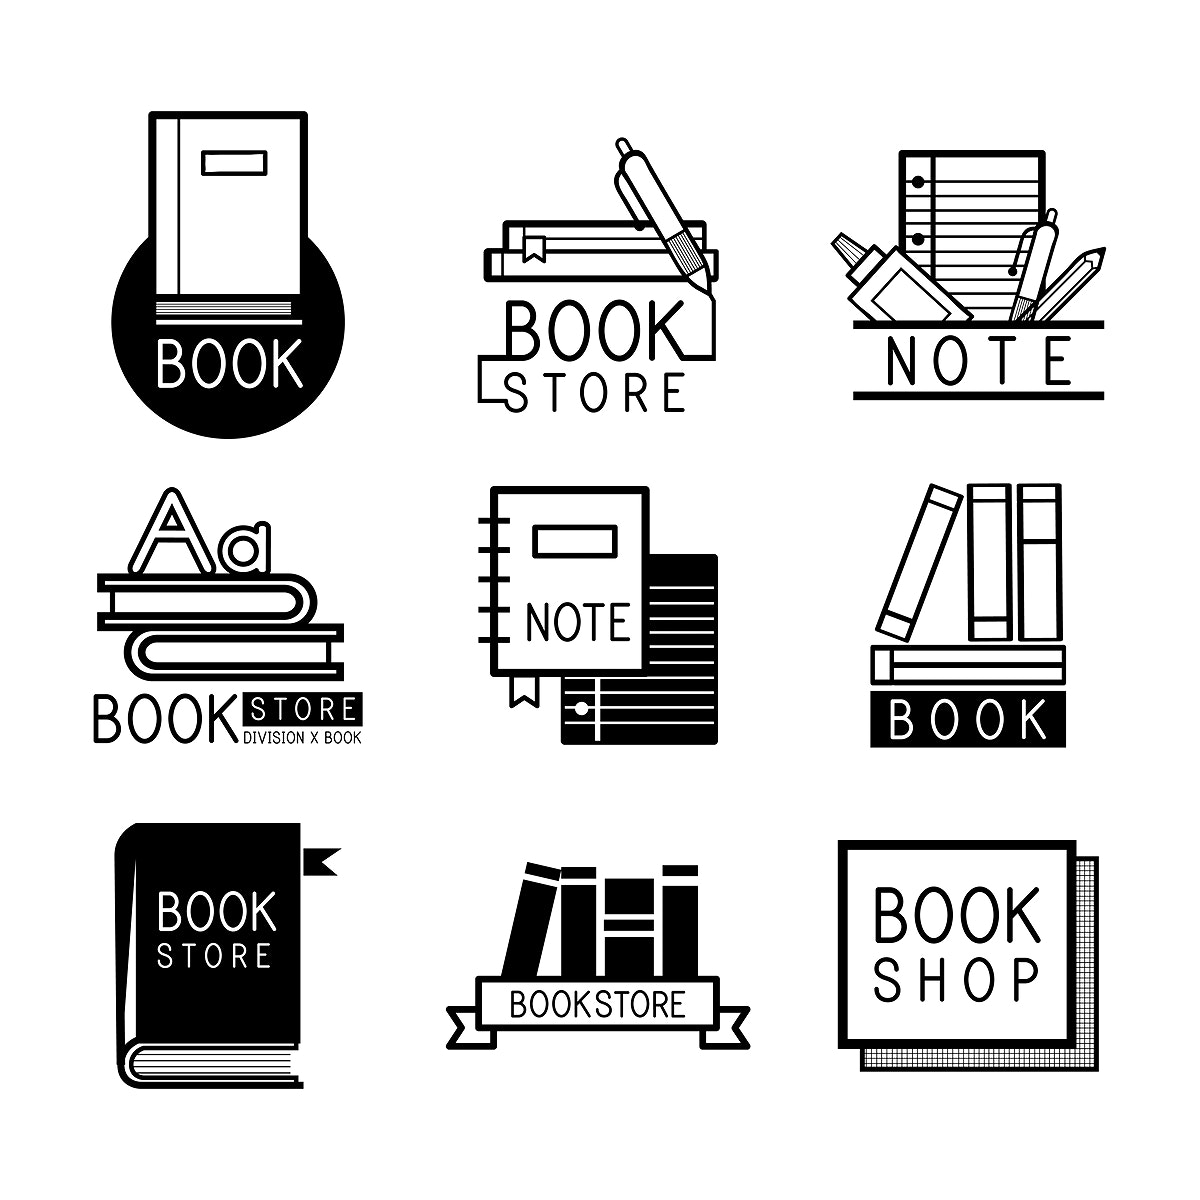 Book Store Background Image Wallpaper